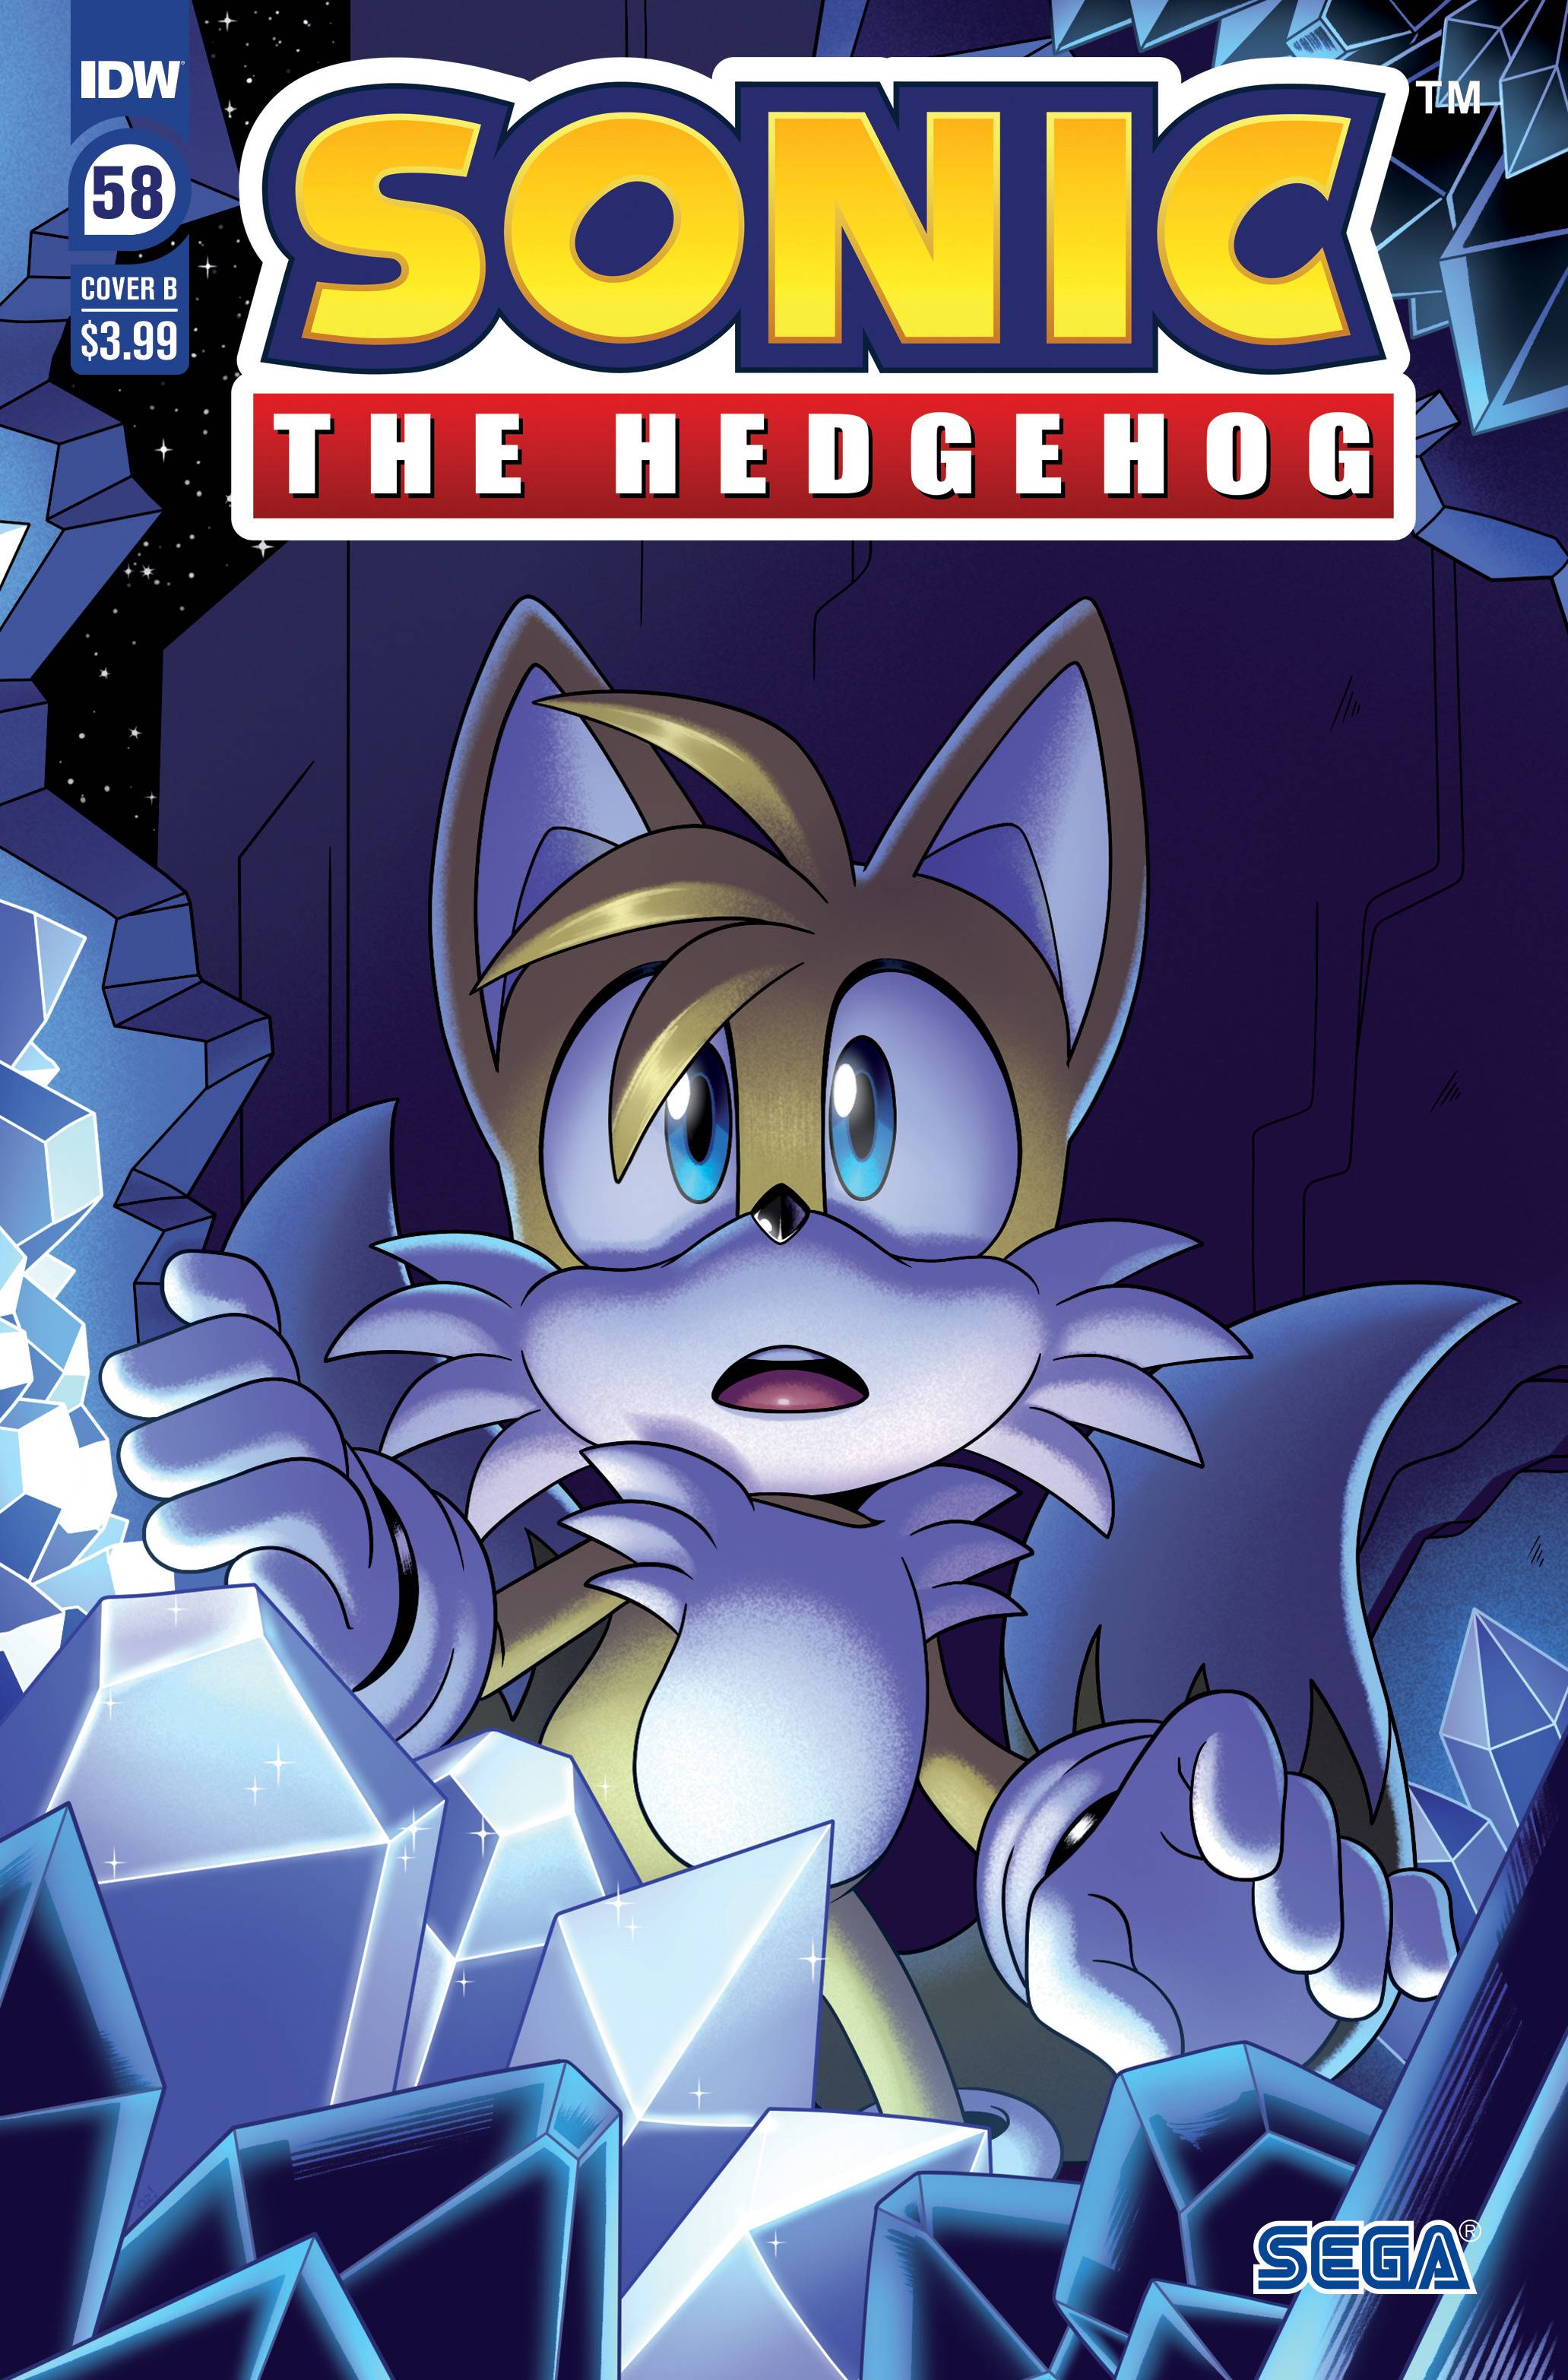 Sonic idw issue 58